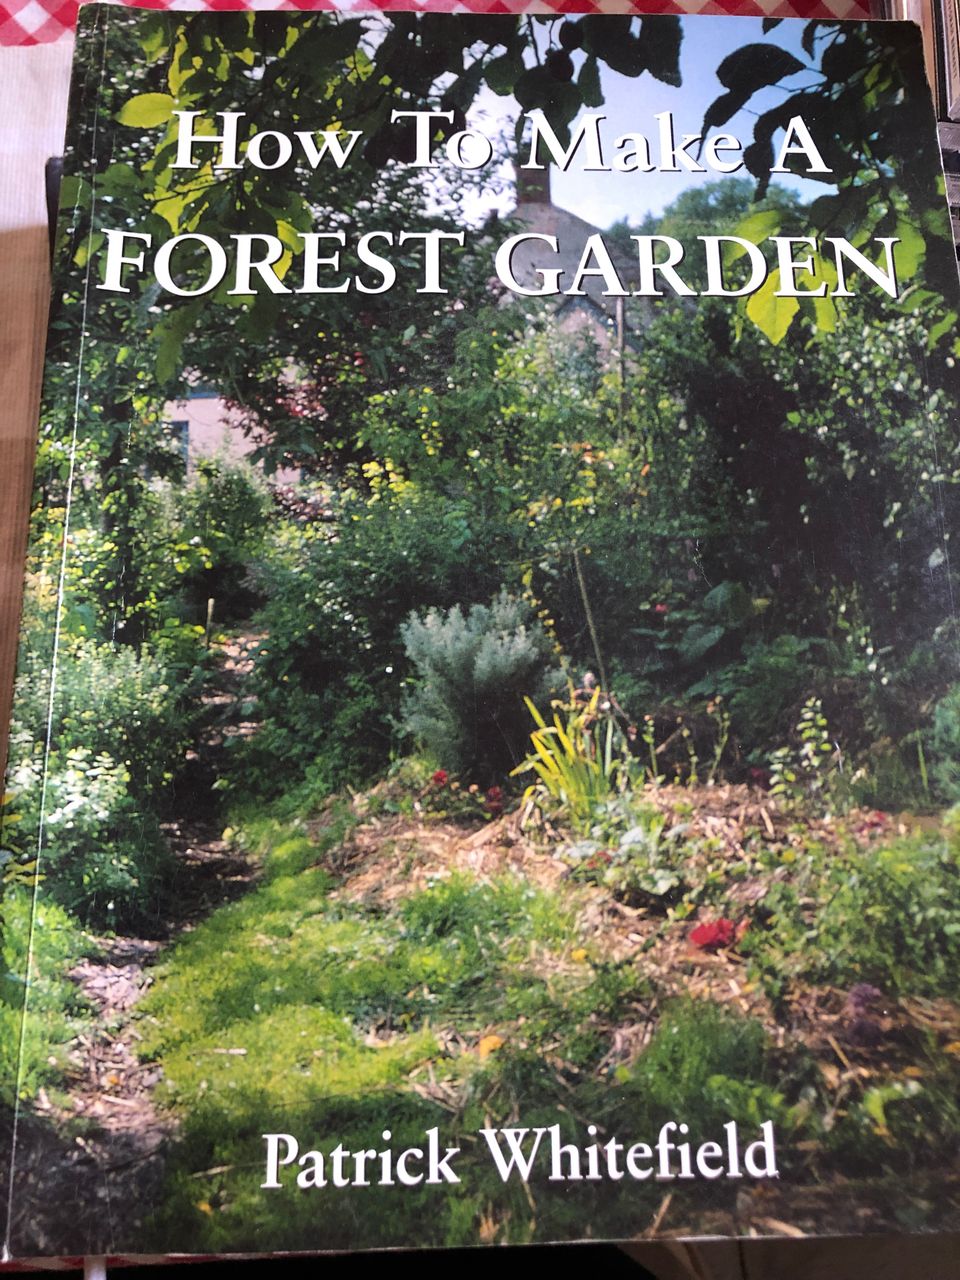 How to make a forest garden